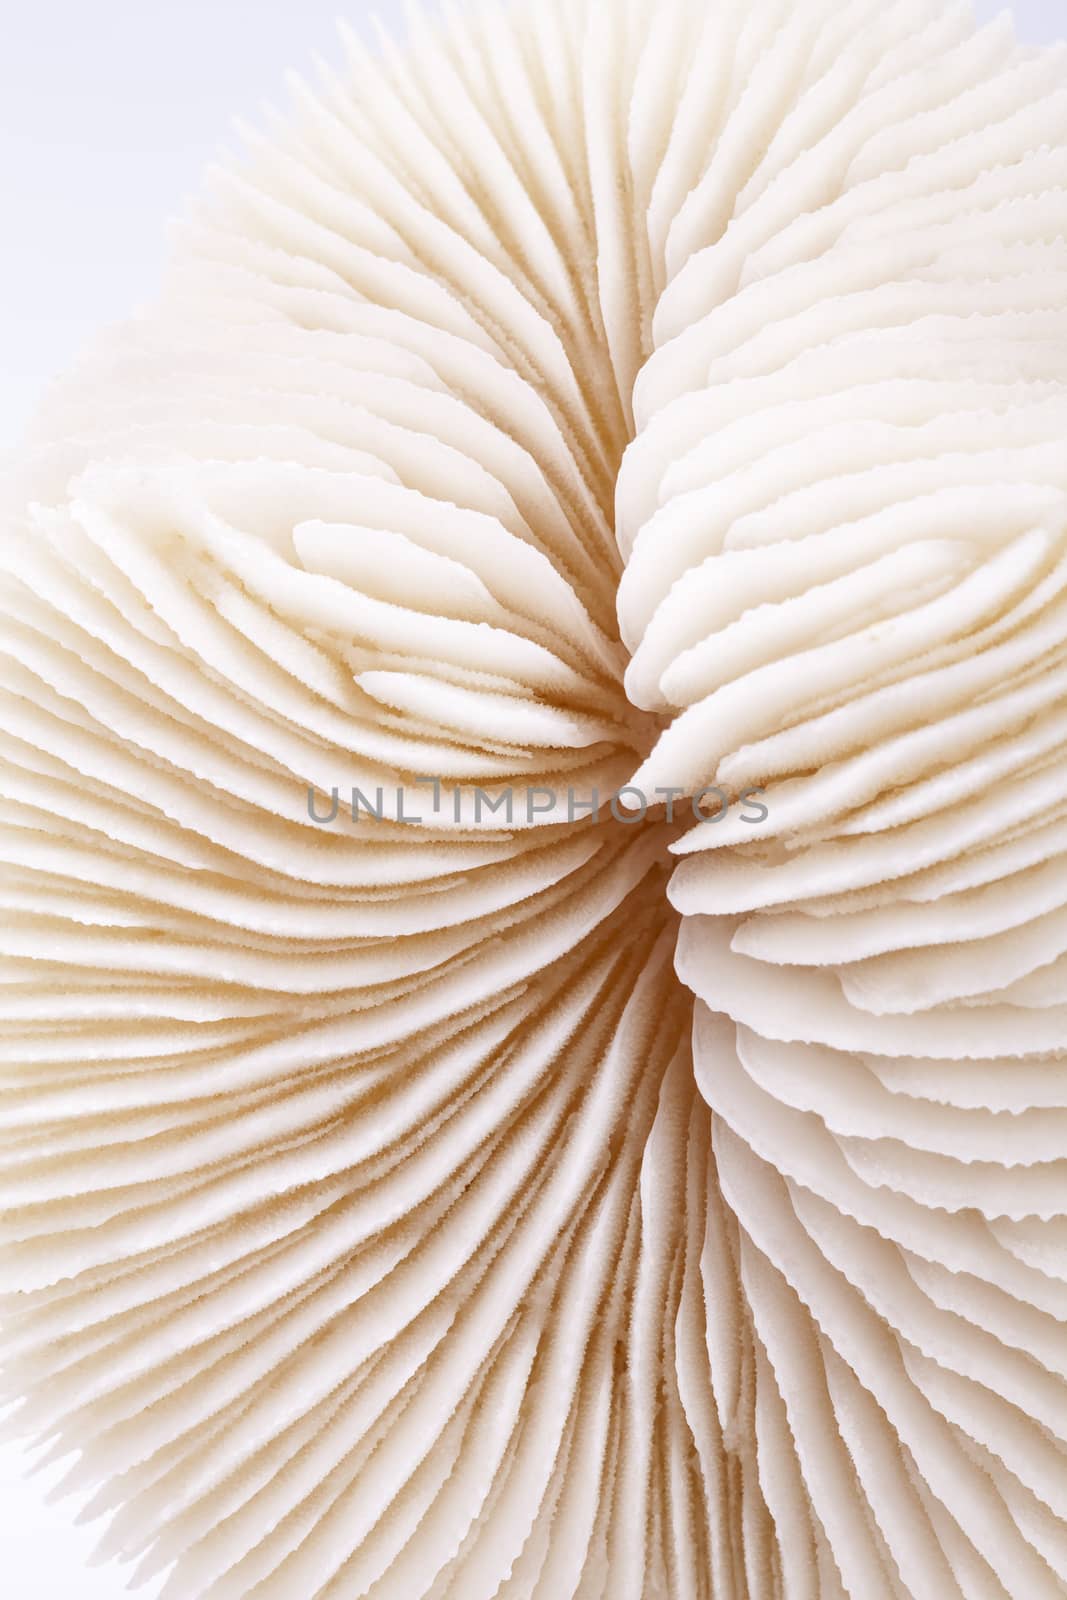 seashell of Fungia  on white background, close up by mychadre77